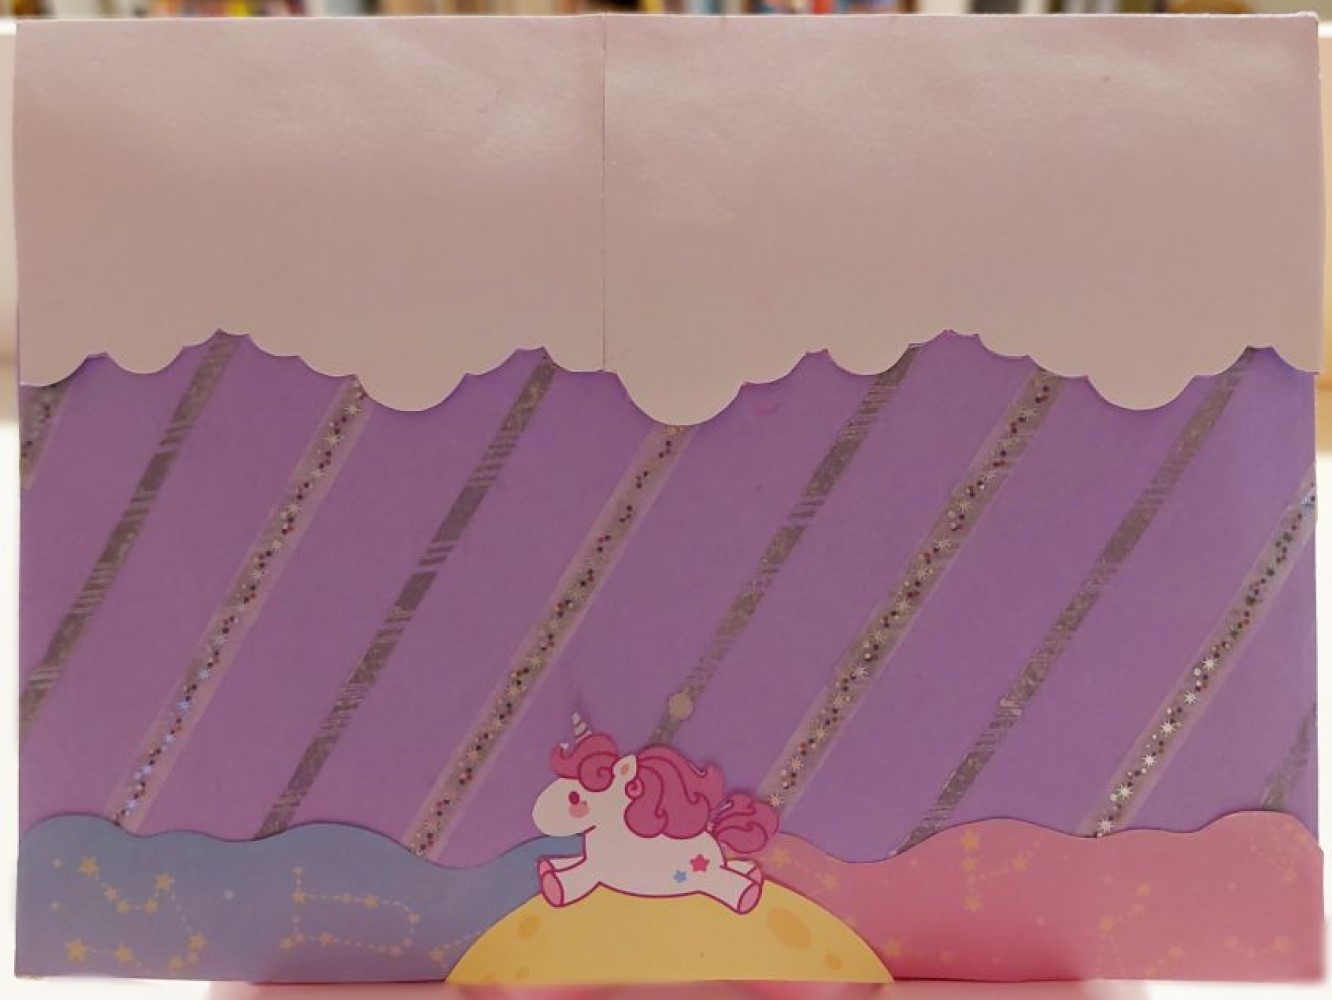 photo of the back of a lavender envelope. there are white clouds on the top flap, diagonal silver stripes on the body of the envelope, and a cartoon unicorn centered at the base of the envelope